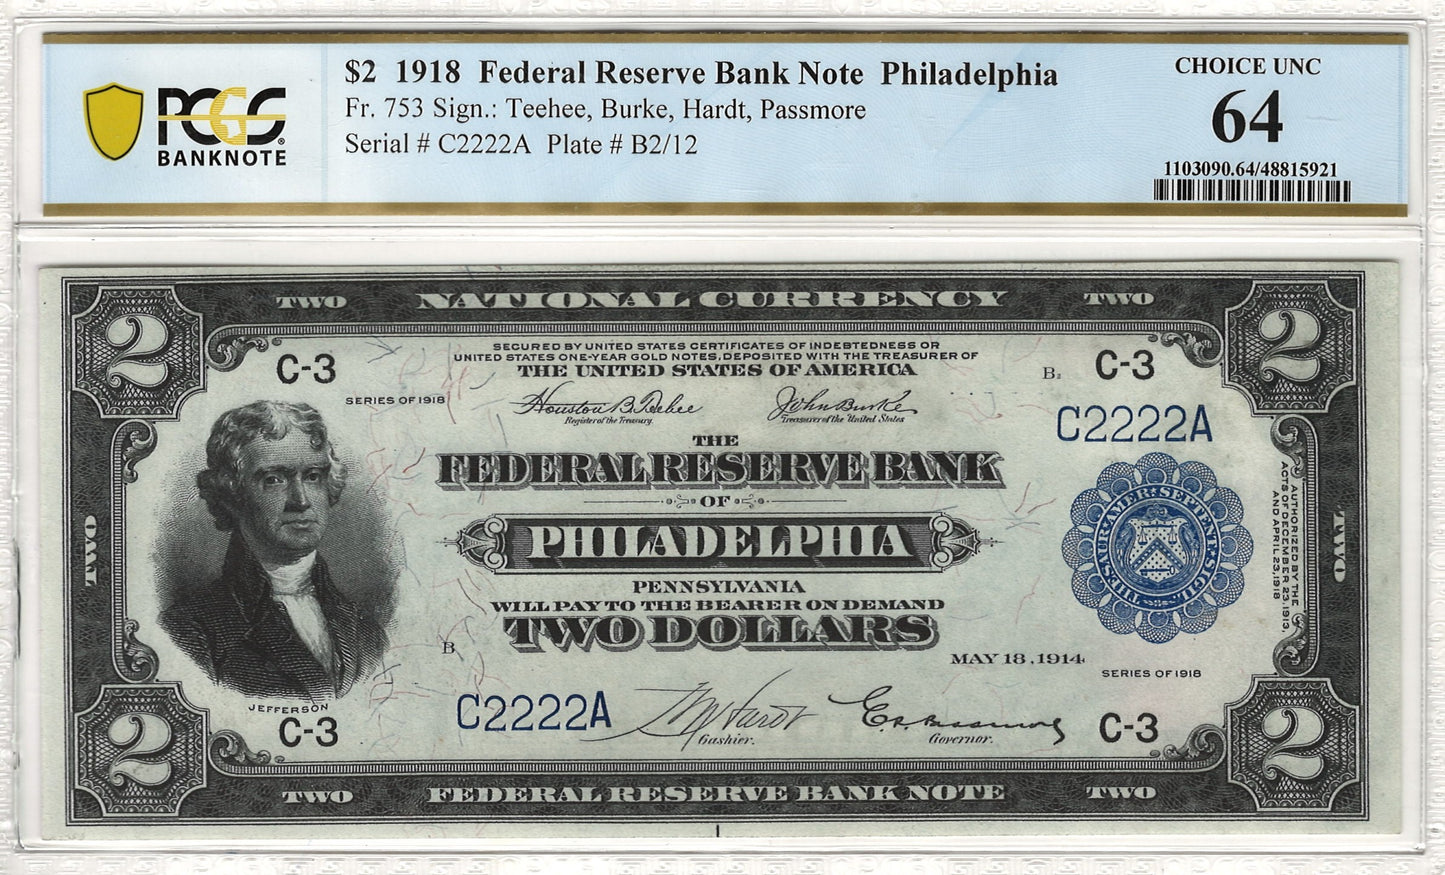 $2 1918 Federal Reserve Note Philadelphia "Battleship" PCGS Banknote Choice UNC 64 Fr. 753 - SOLID SERIAL NUMBER Front